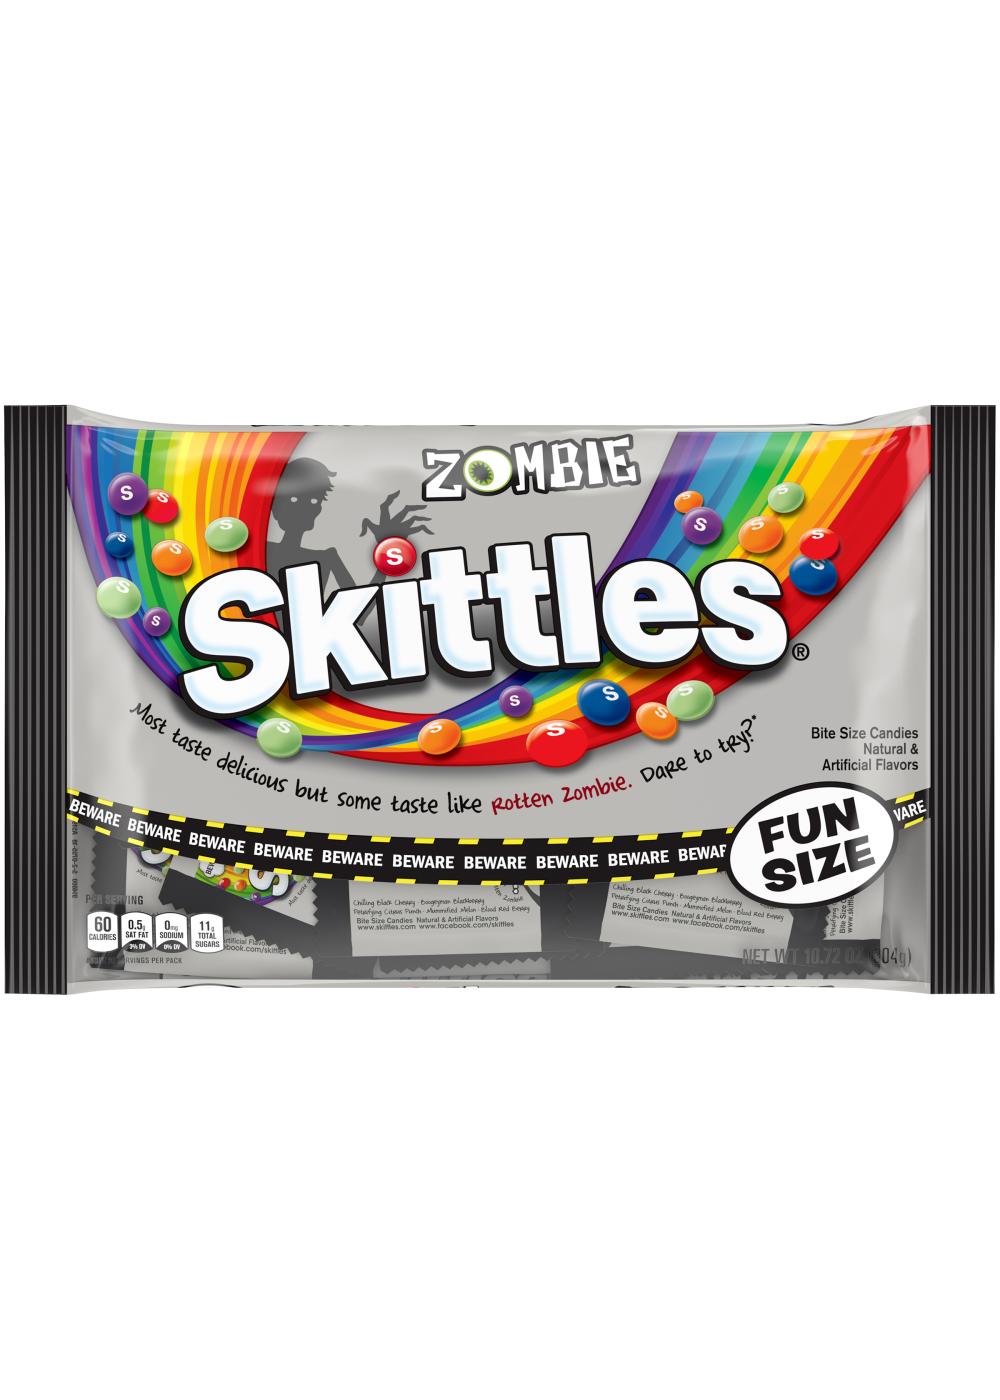 Skittles Zombie Fun Size Halloween Candy Bag; image 1 of 3